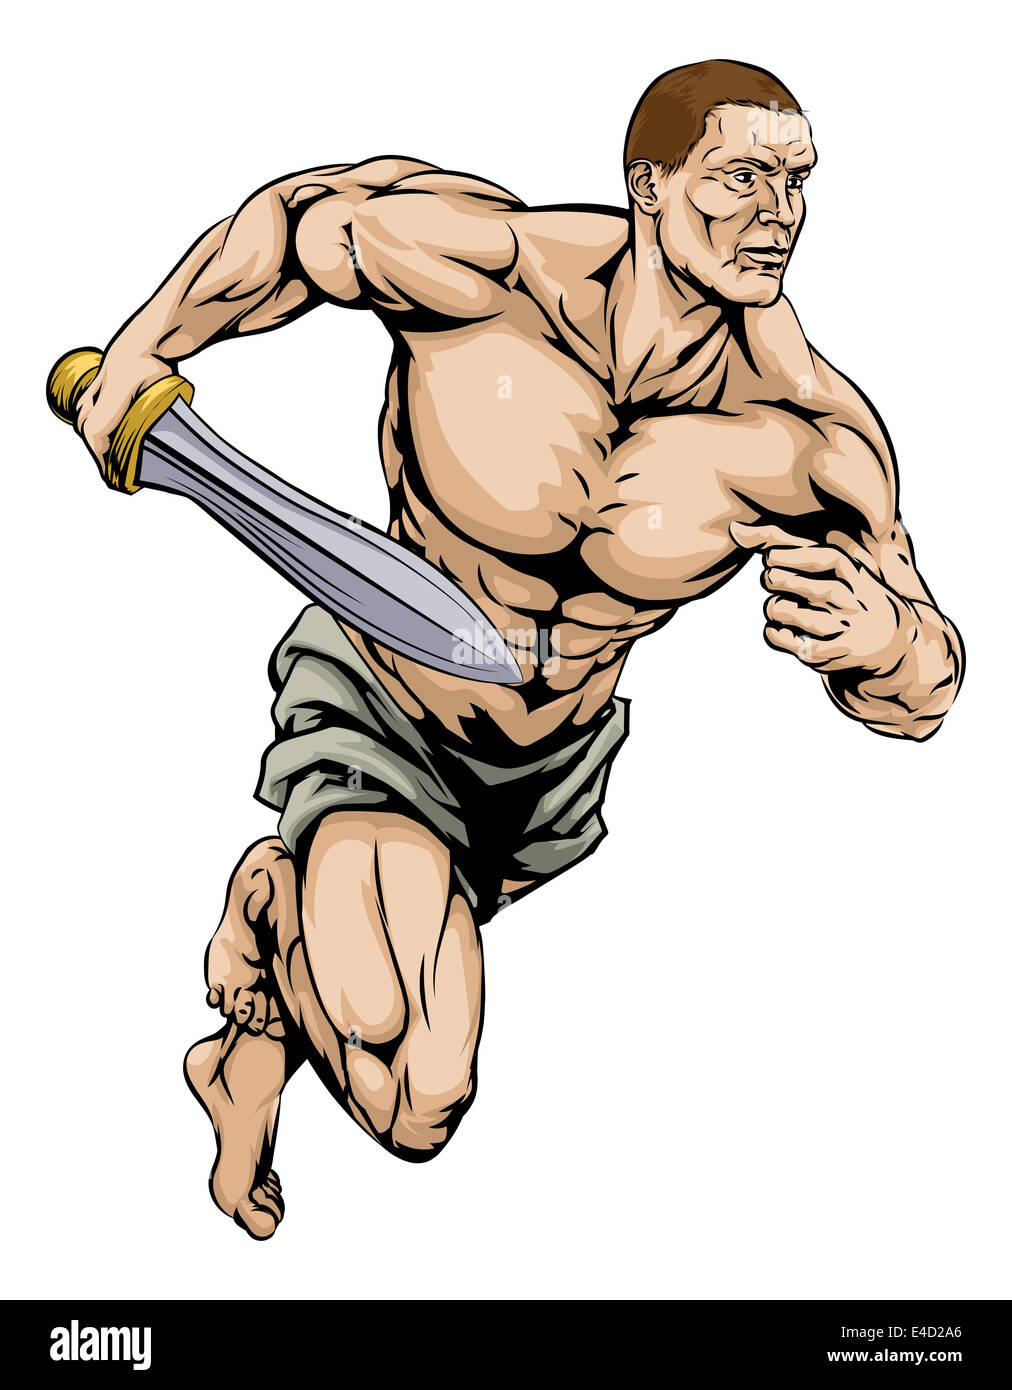 An illustration of a warrior or gladiator man character or sports mascot holding a sword Stock Photo